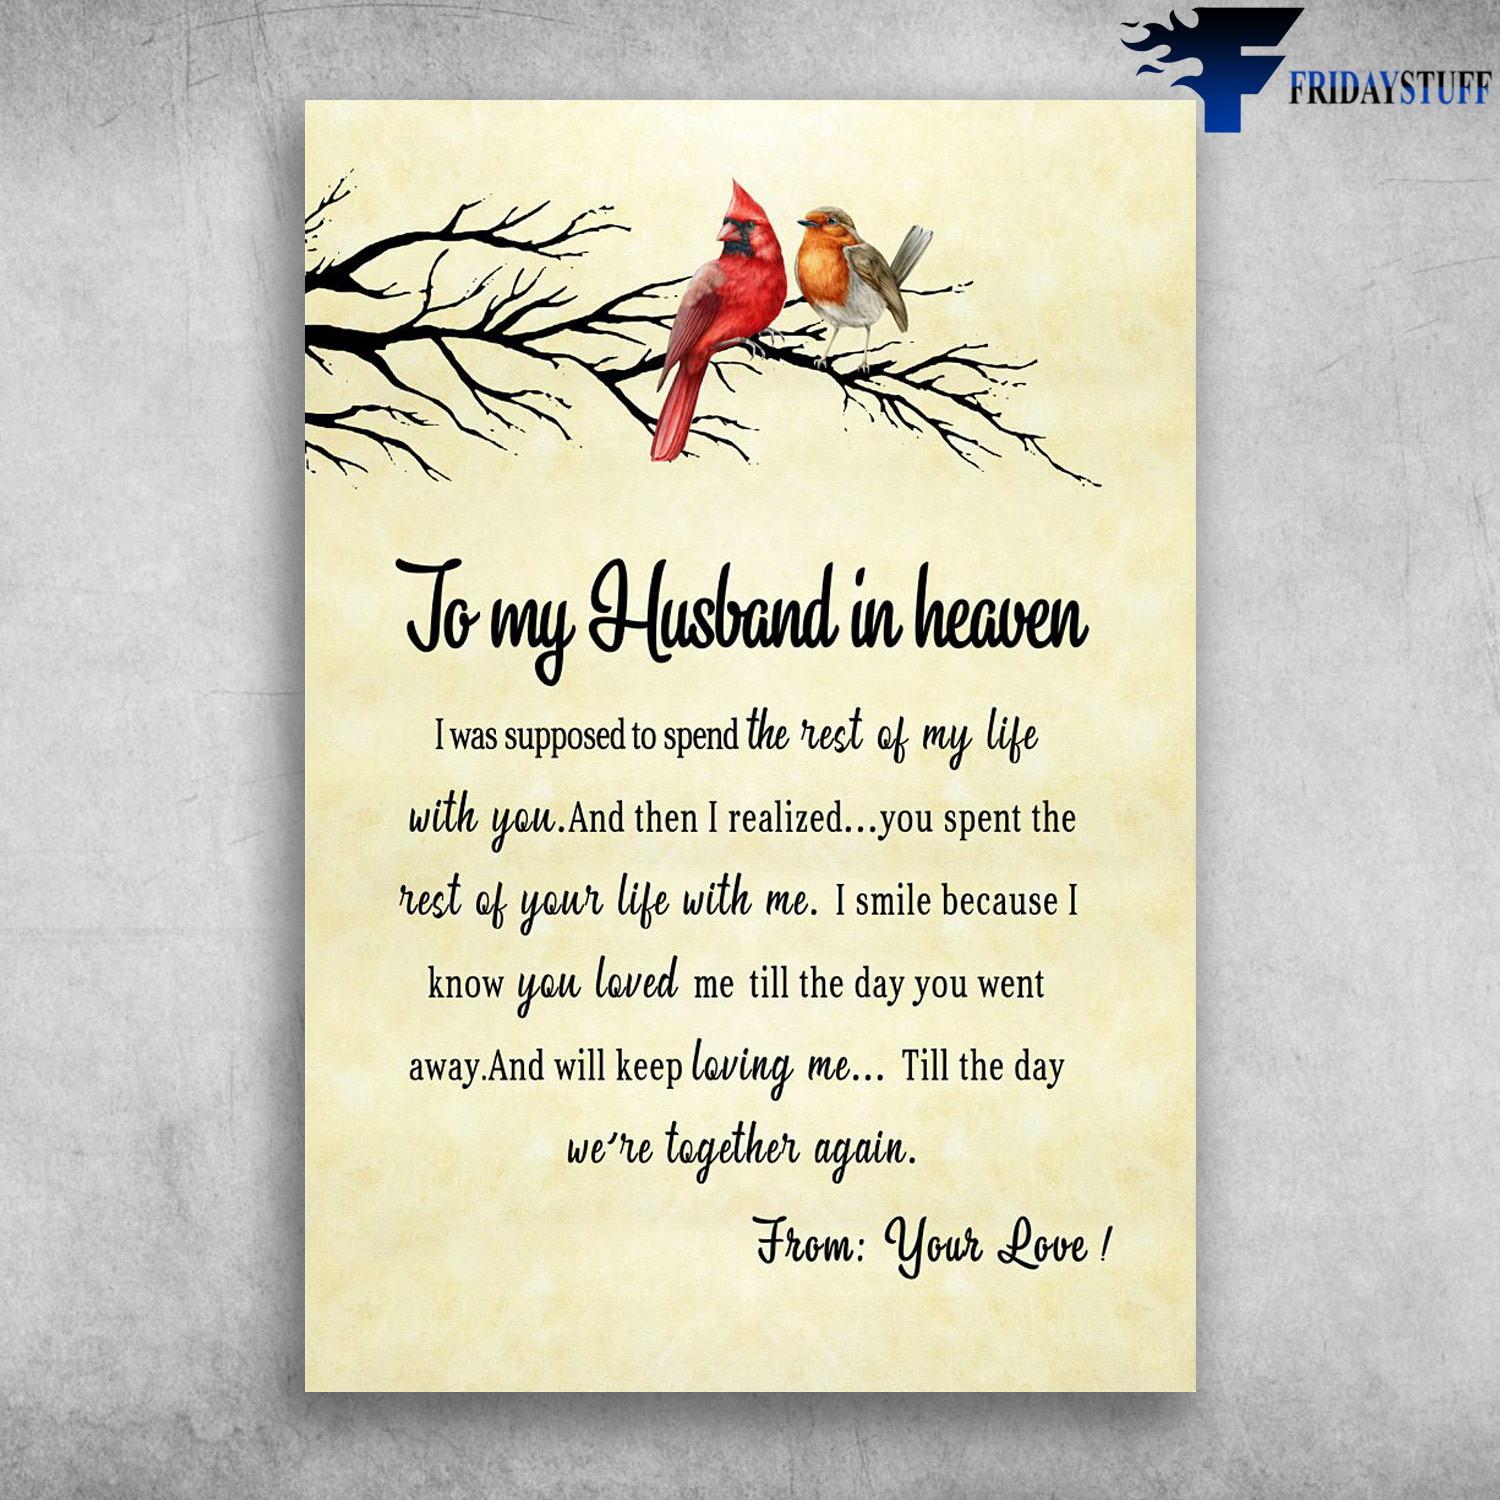 Cardinal Bird - To My Husband In Heaven, I Was Supposed, To Spend The Rest Of My Life, With You, And Then I Realized, You Spent The Rest Of Your Life With Me, I Smile Because I Know You Loved Me